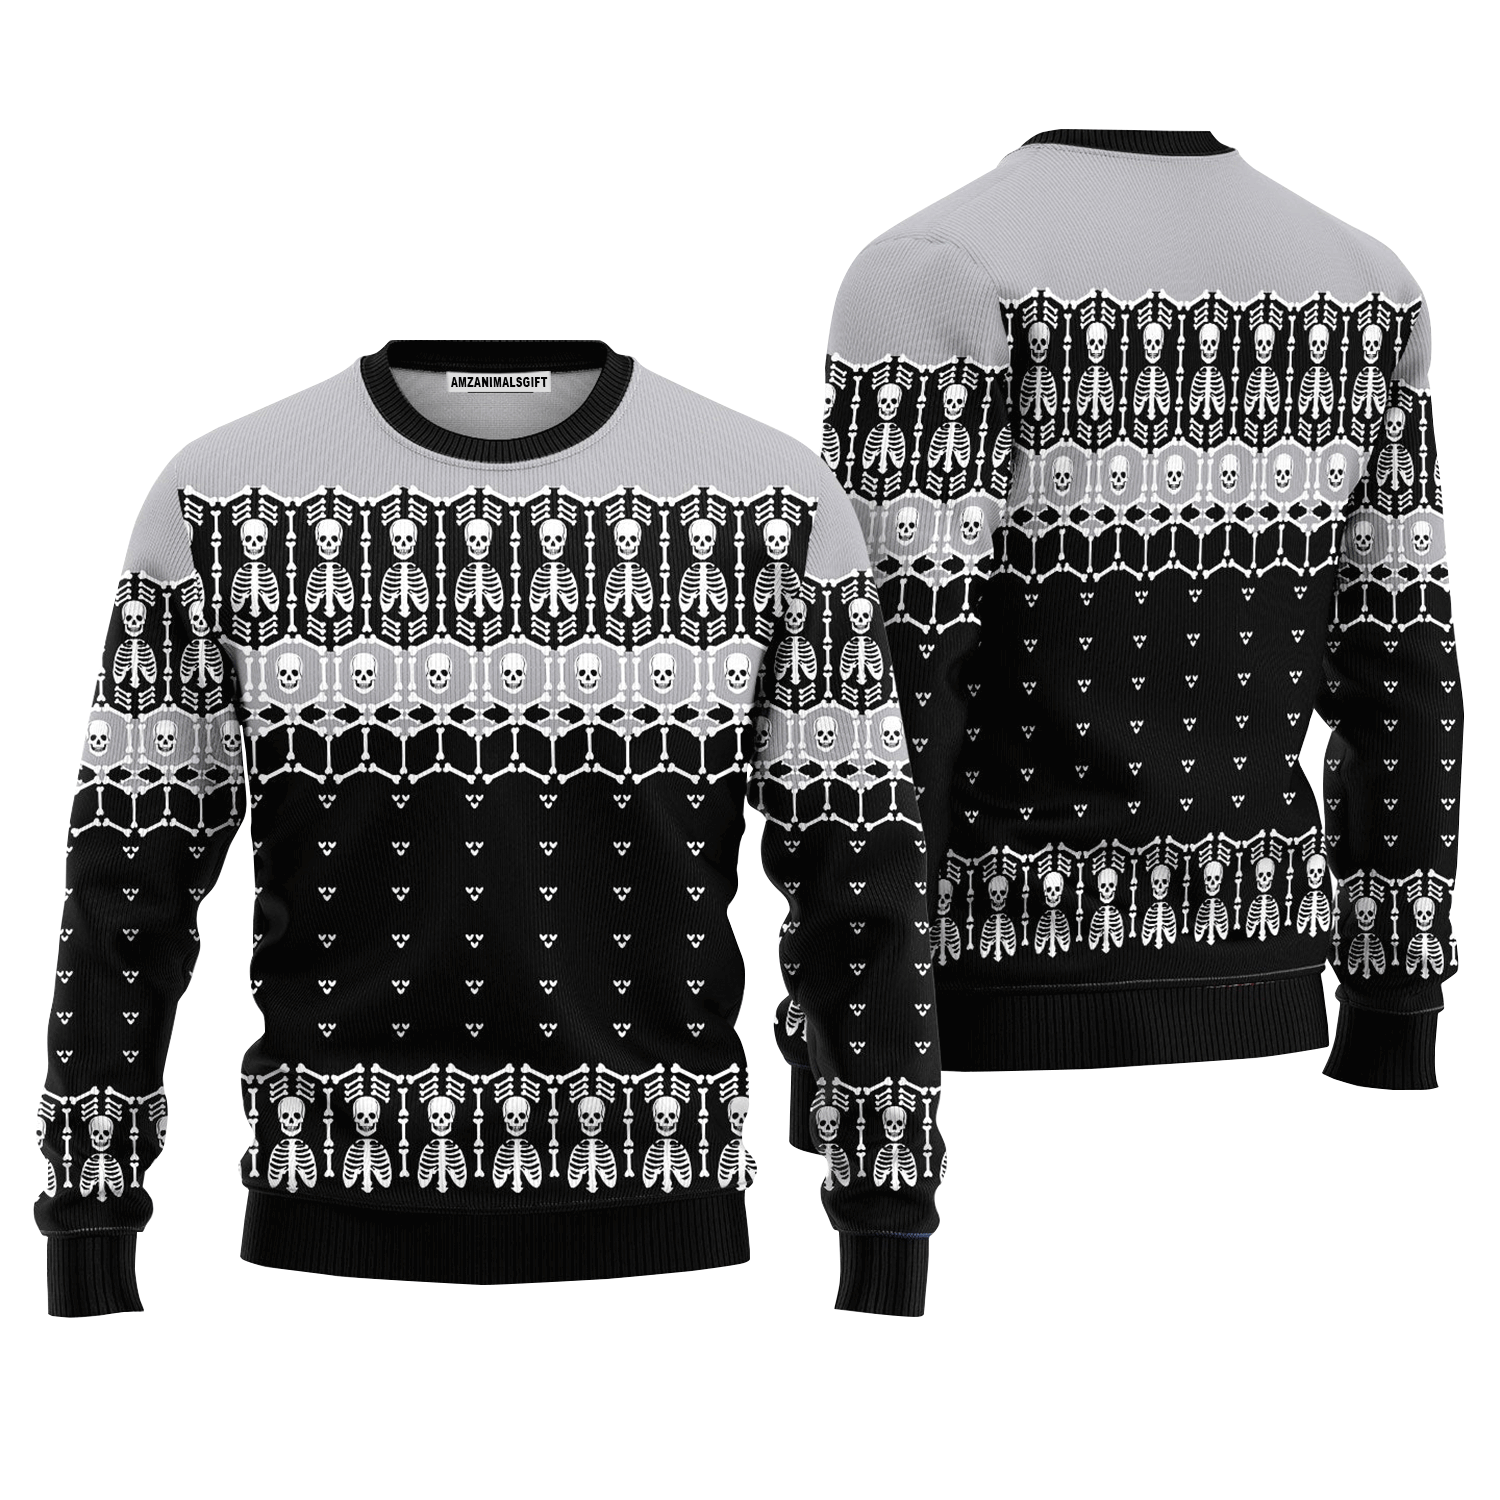 Black And White Skeleton Sweater, Ugly Christmas Sweater For Men & Women, Perfect Outfit For Christmas New Year Autumn Winter